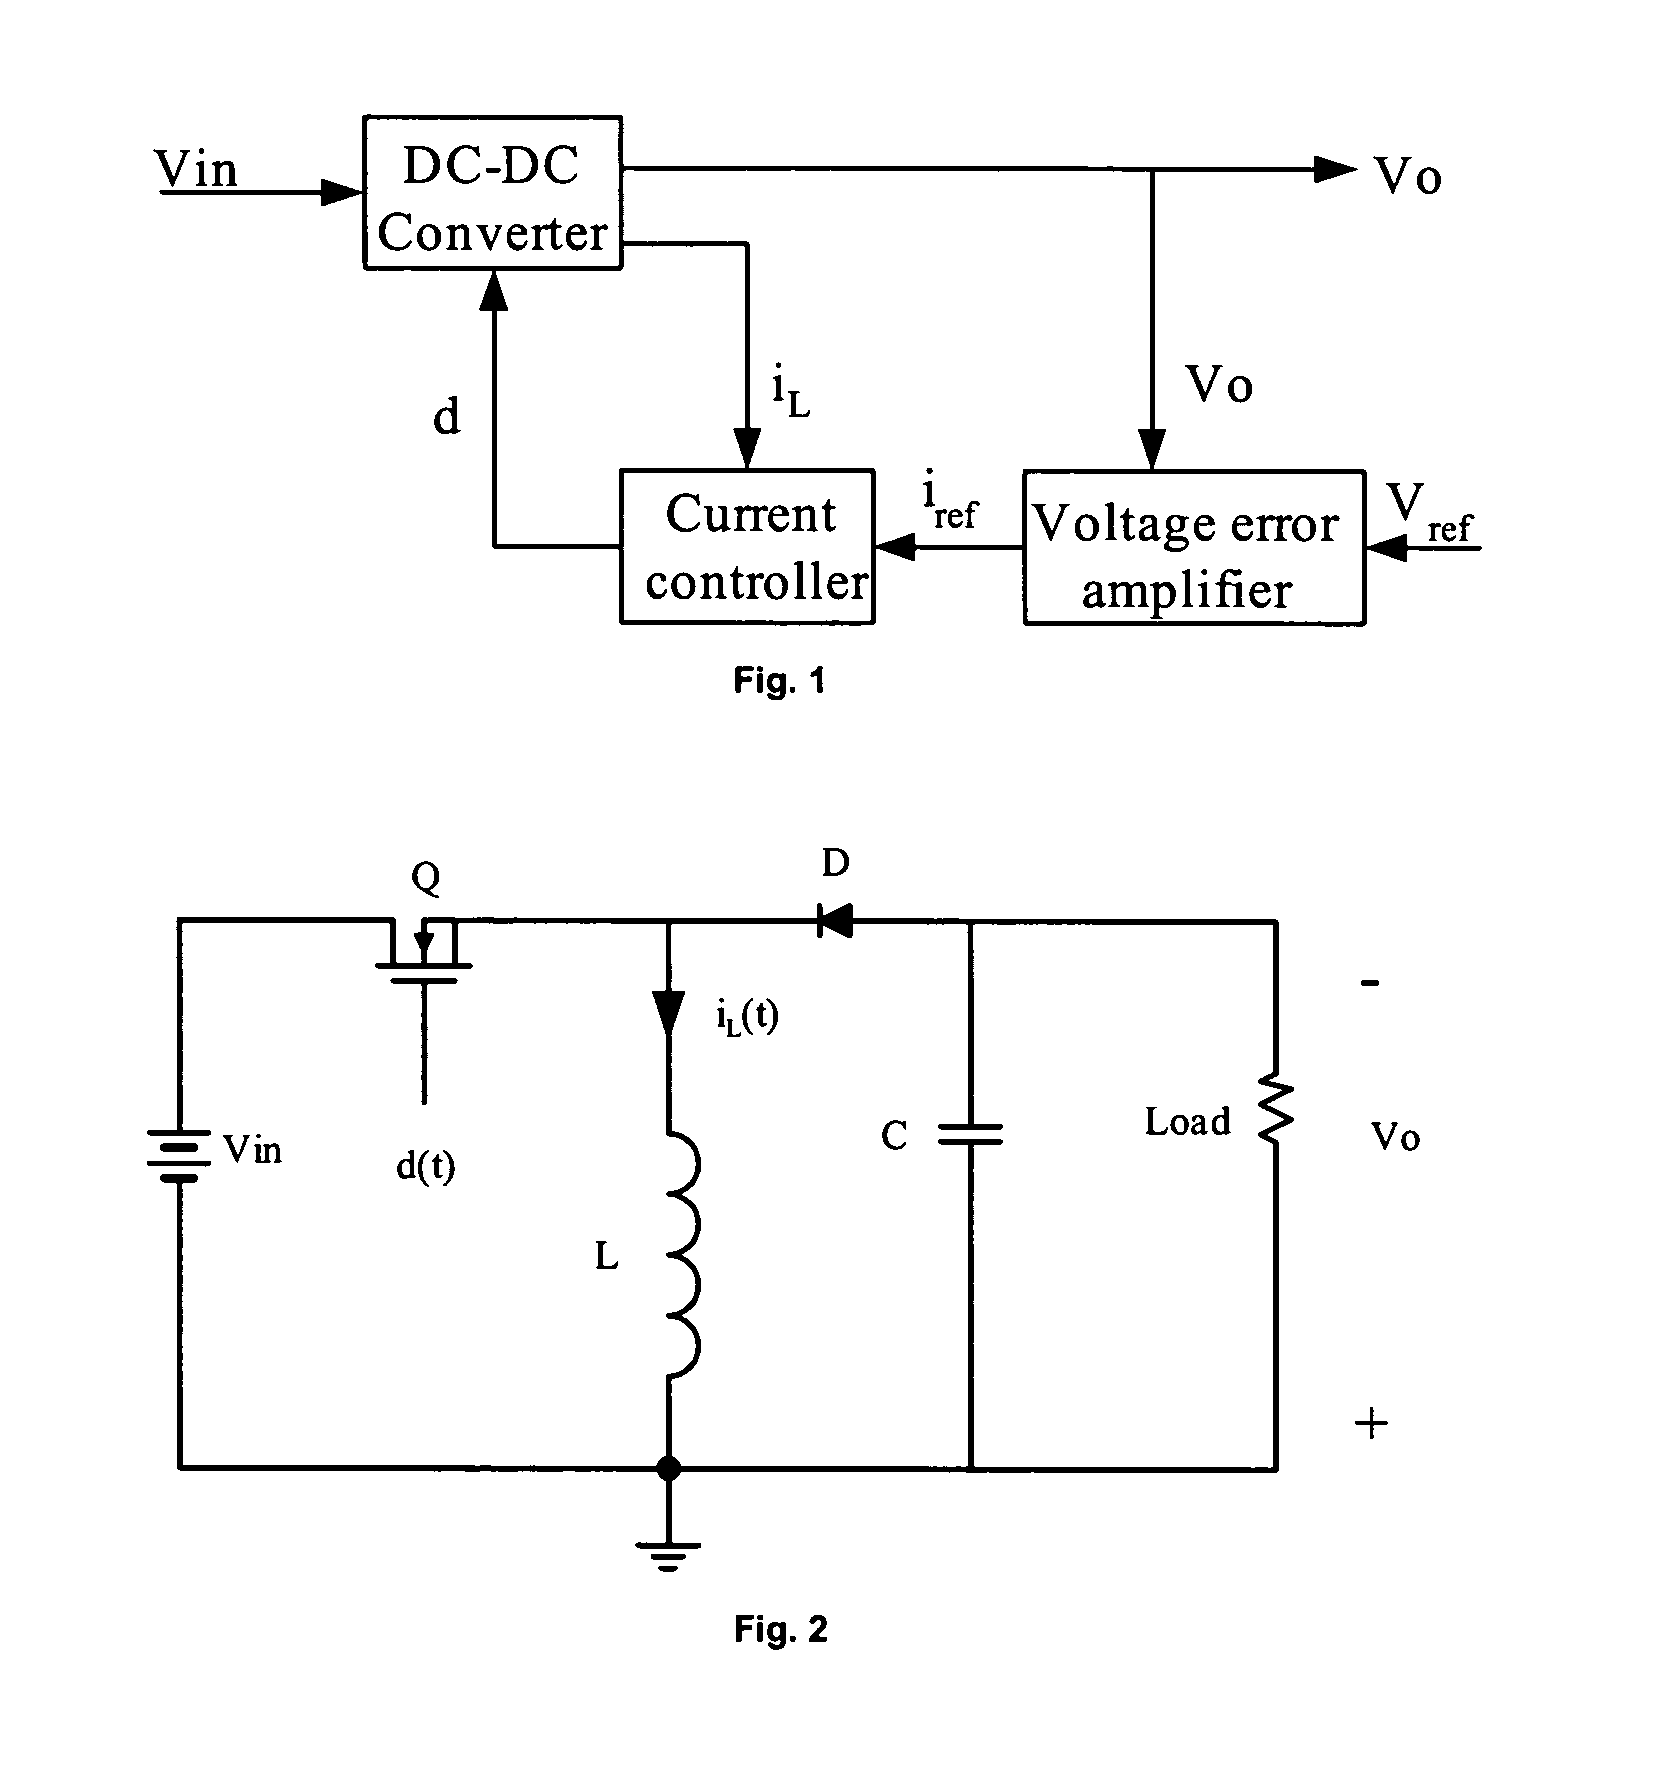 Parallel current mode control